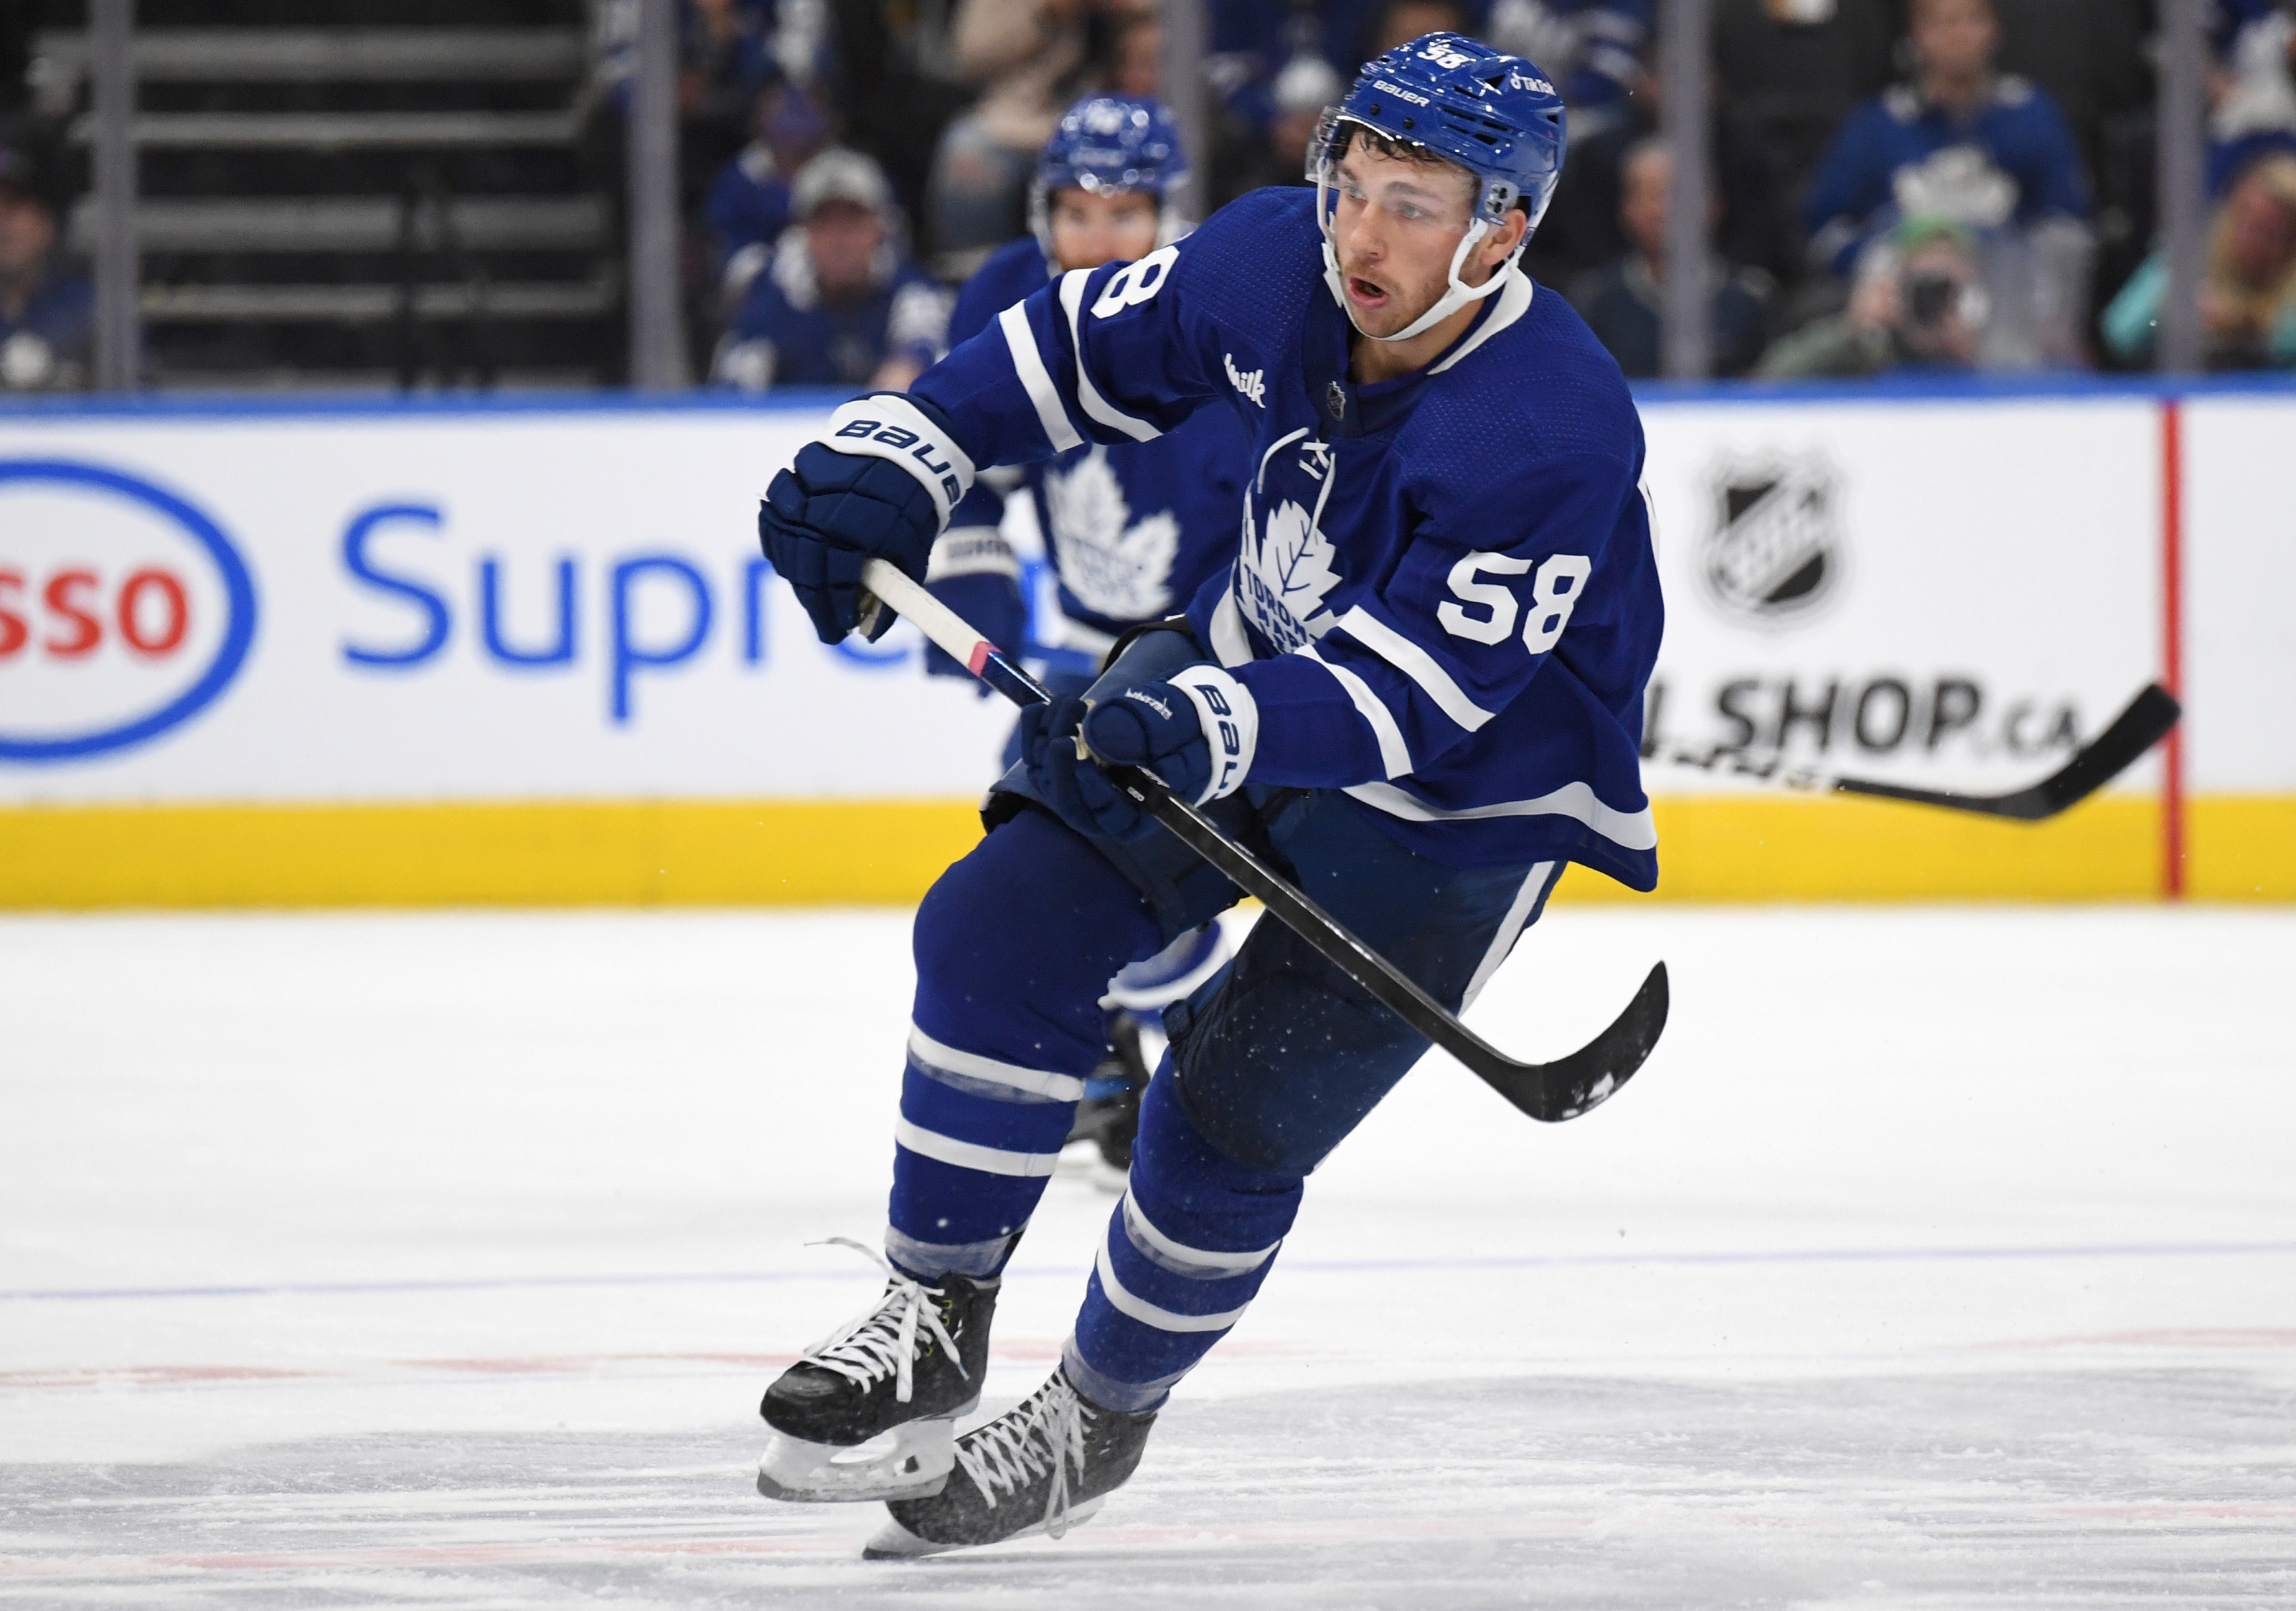 How the Maple Leafs Can Keep Michael Bunting Long-Term